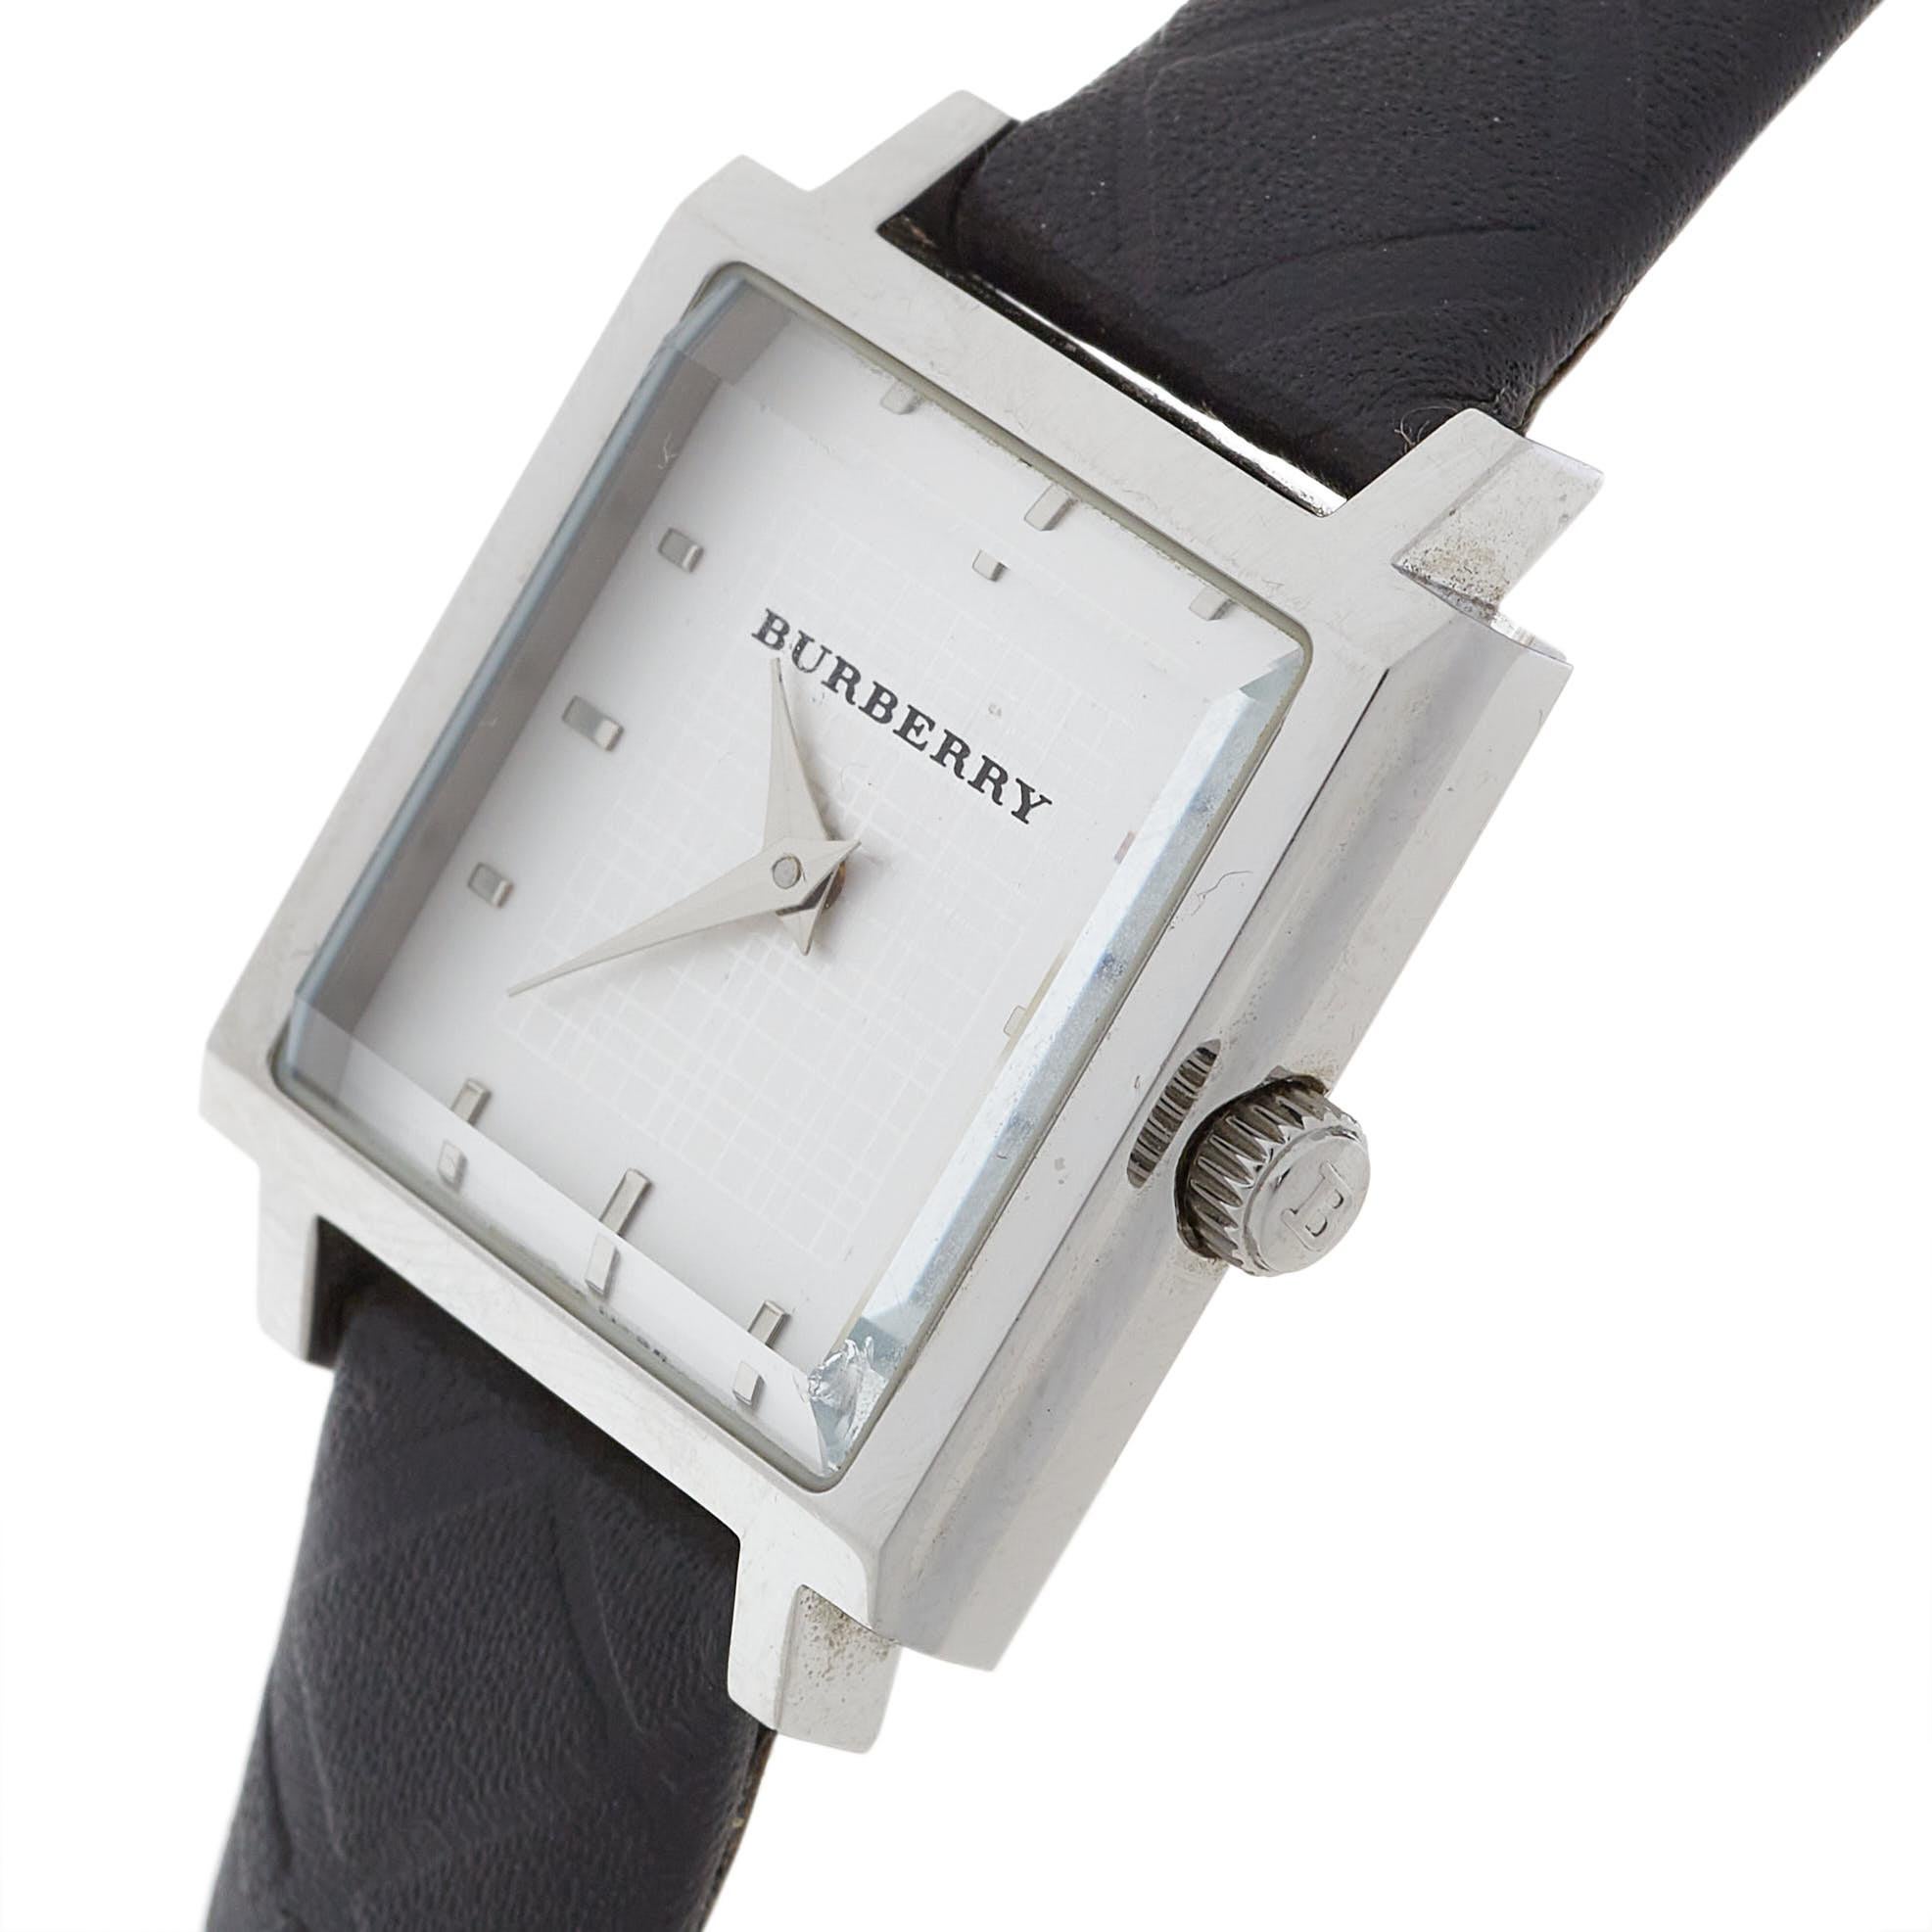 burberry watch square face